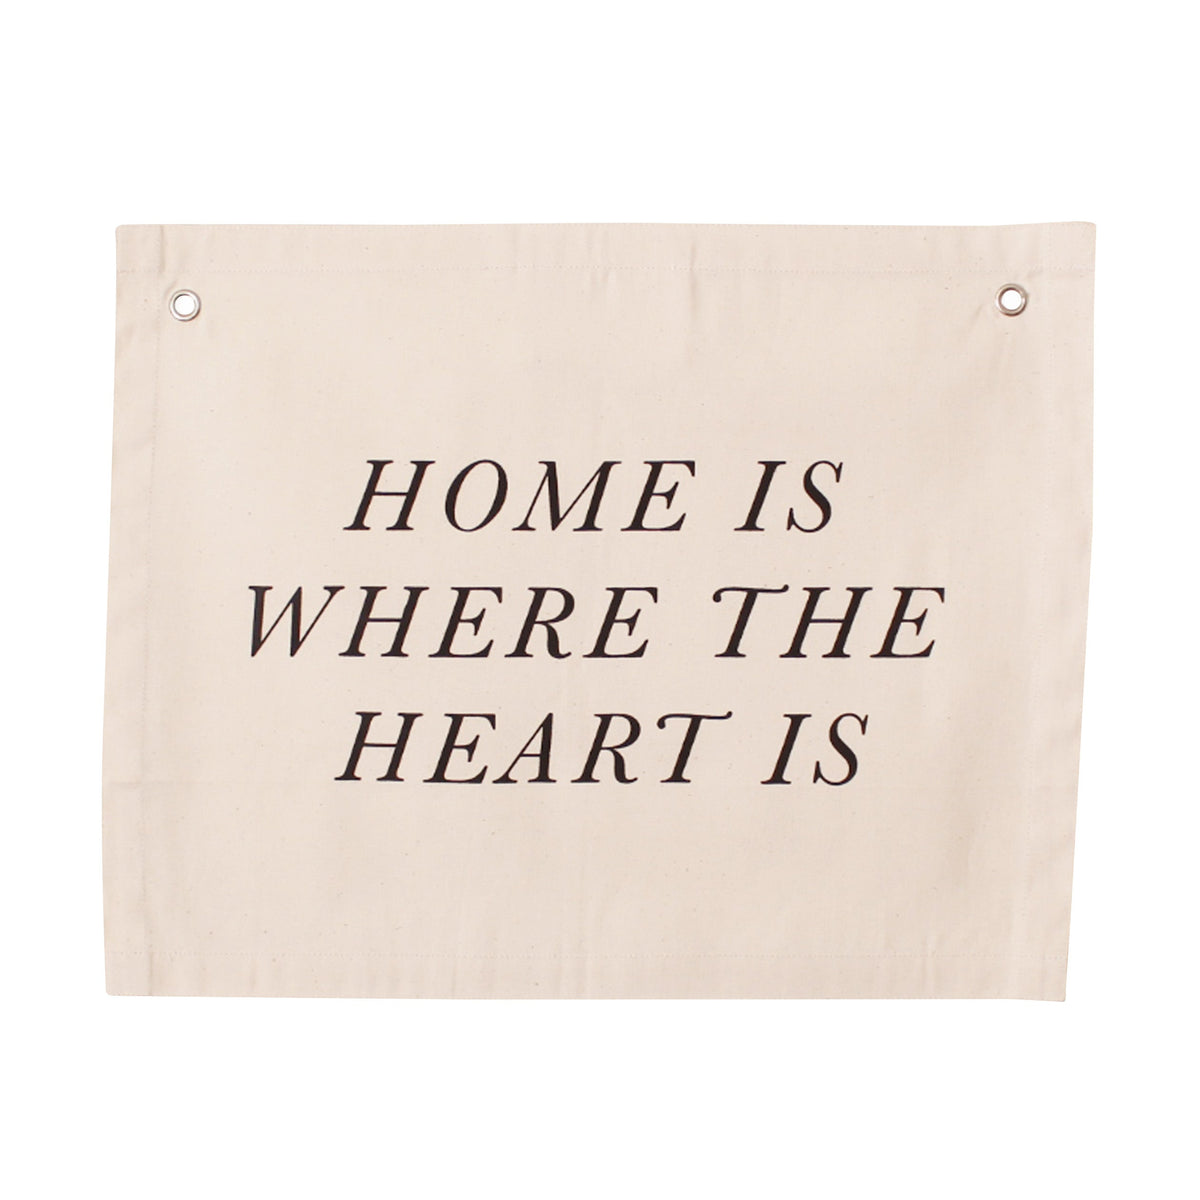 Home Is Where The Heart Is Banner